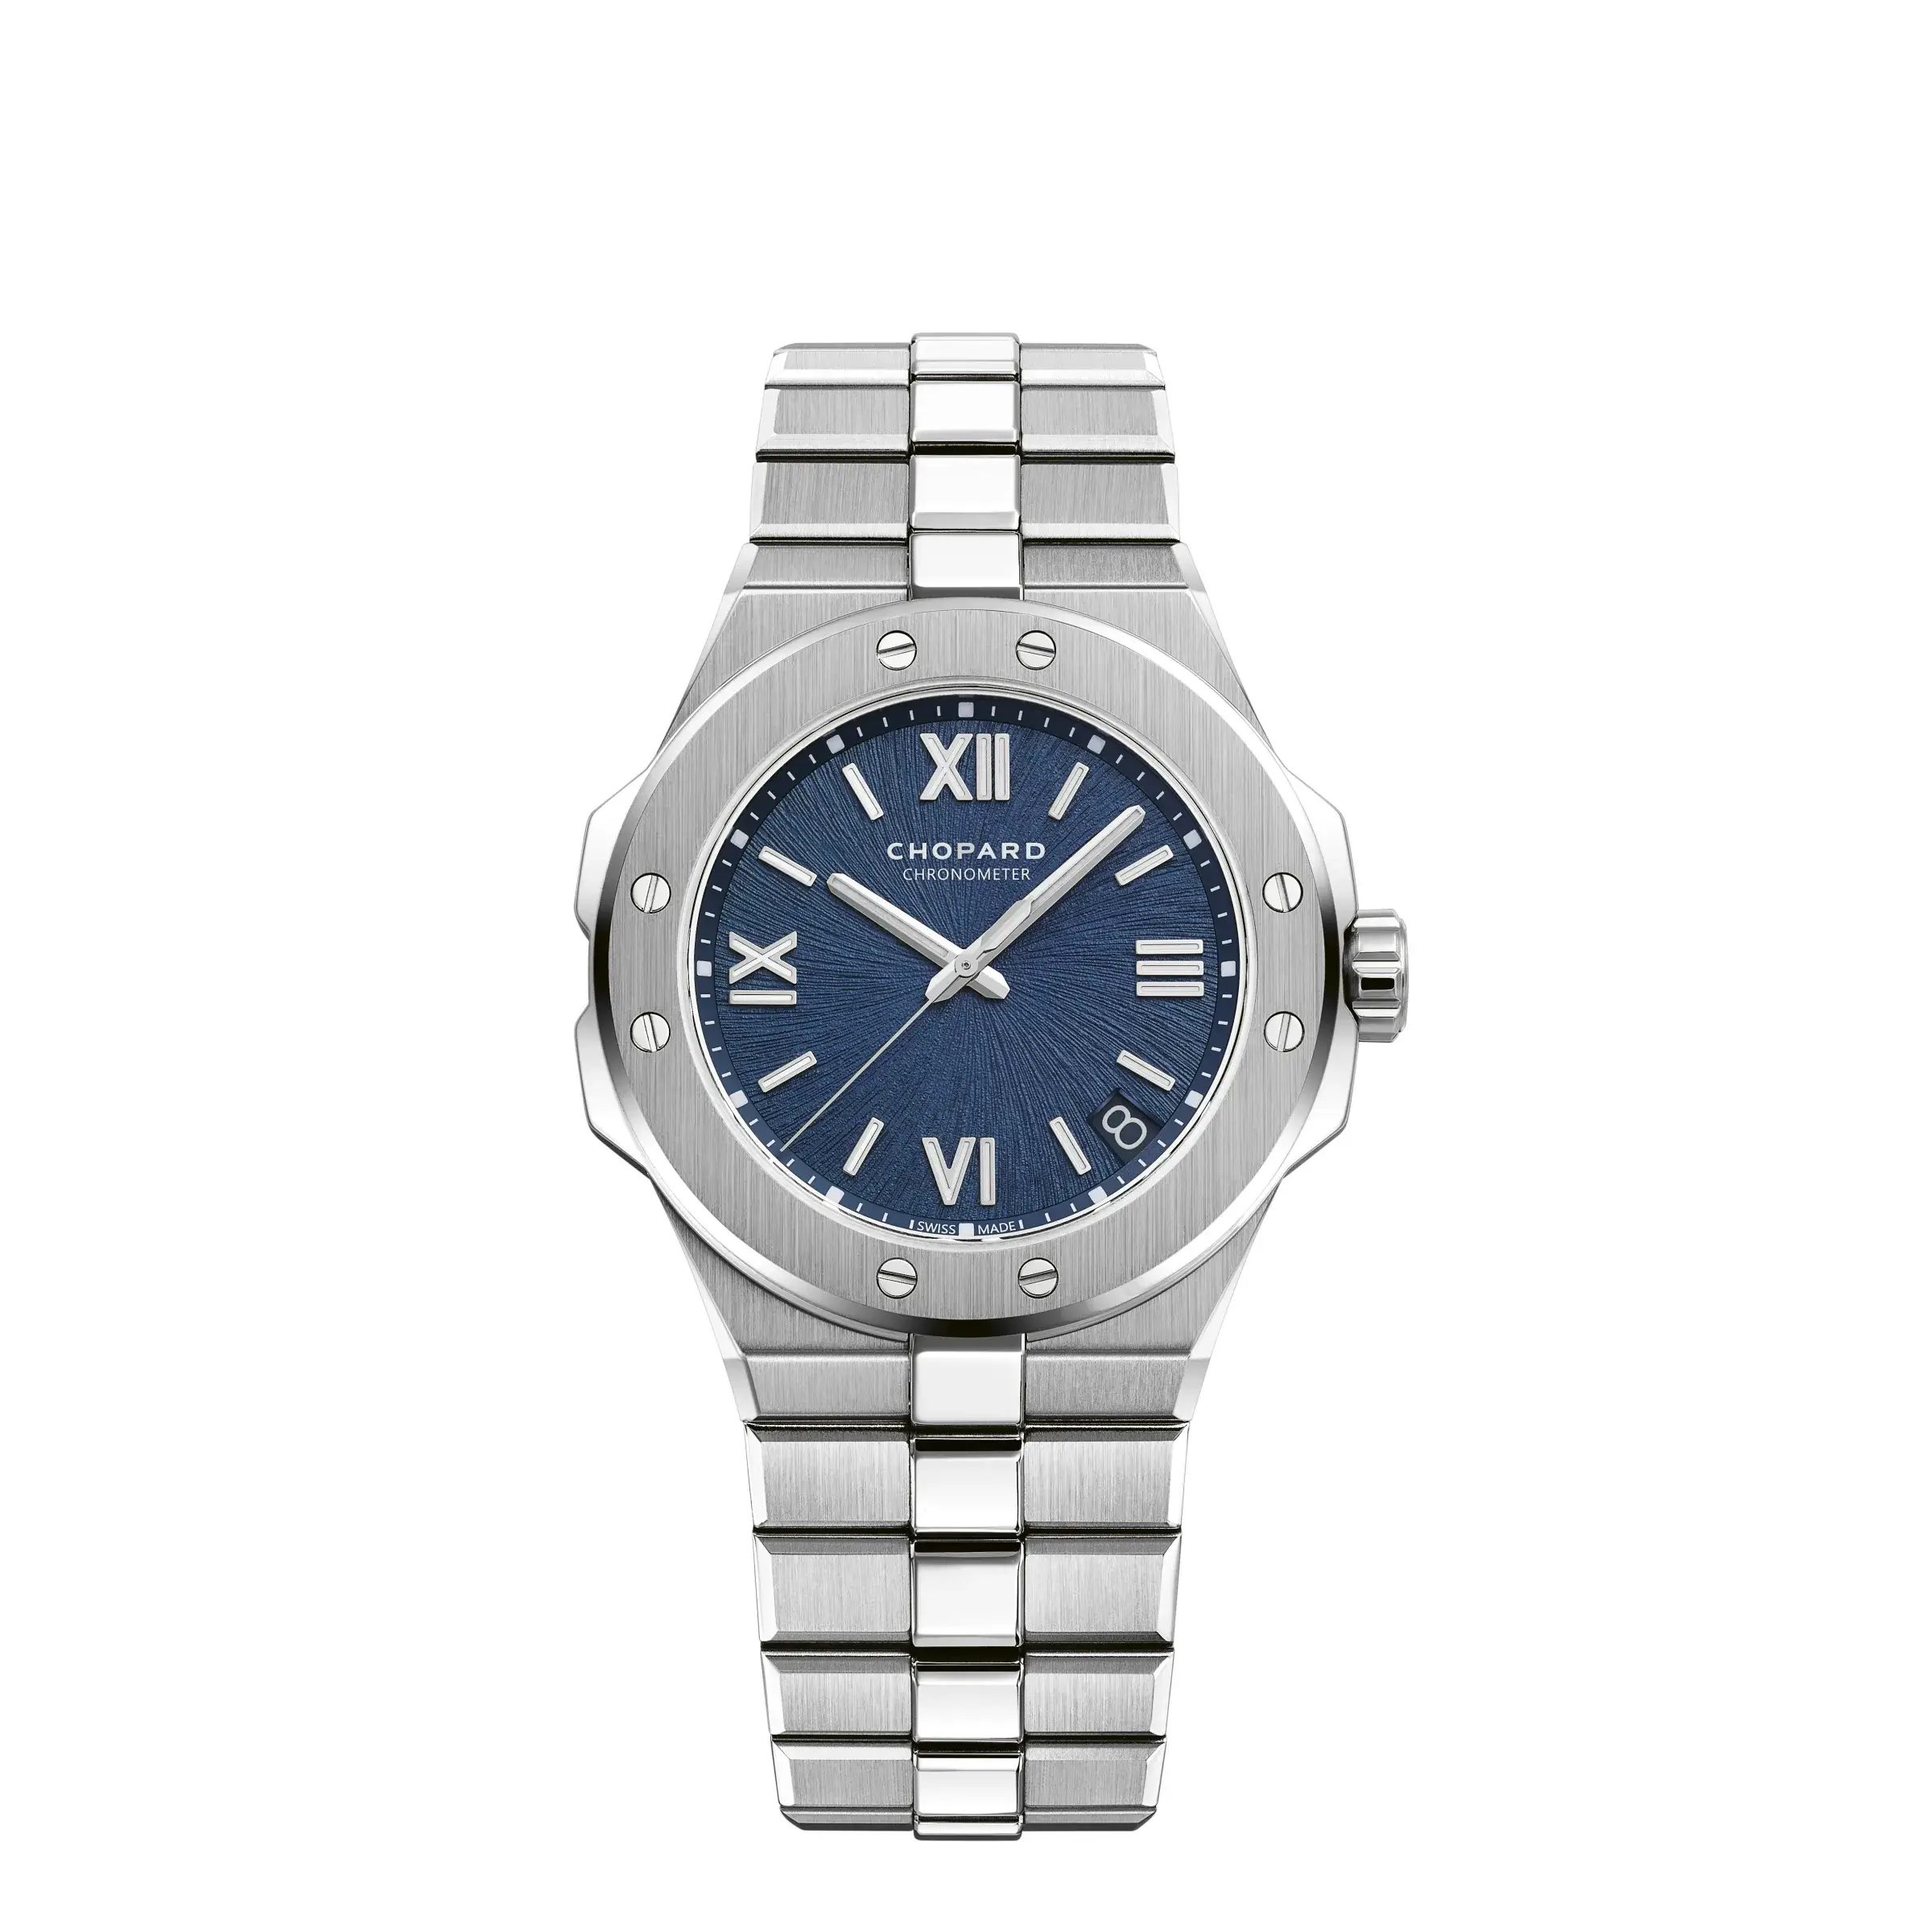 A Chopard luxury watch with a stainless steel bracelet, textured bezel, and blue dial featuring Roman numerals at the twelve and six o'clock positions.